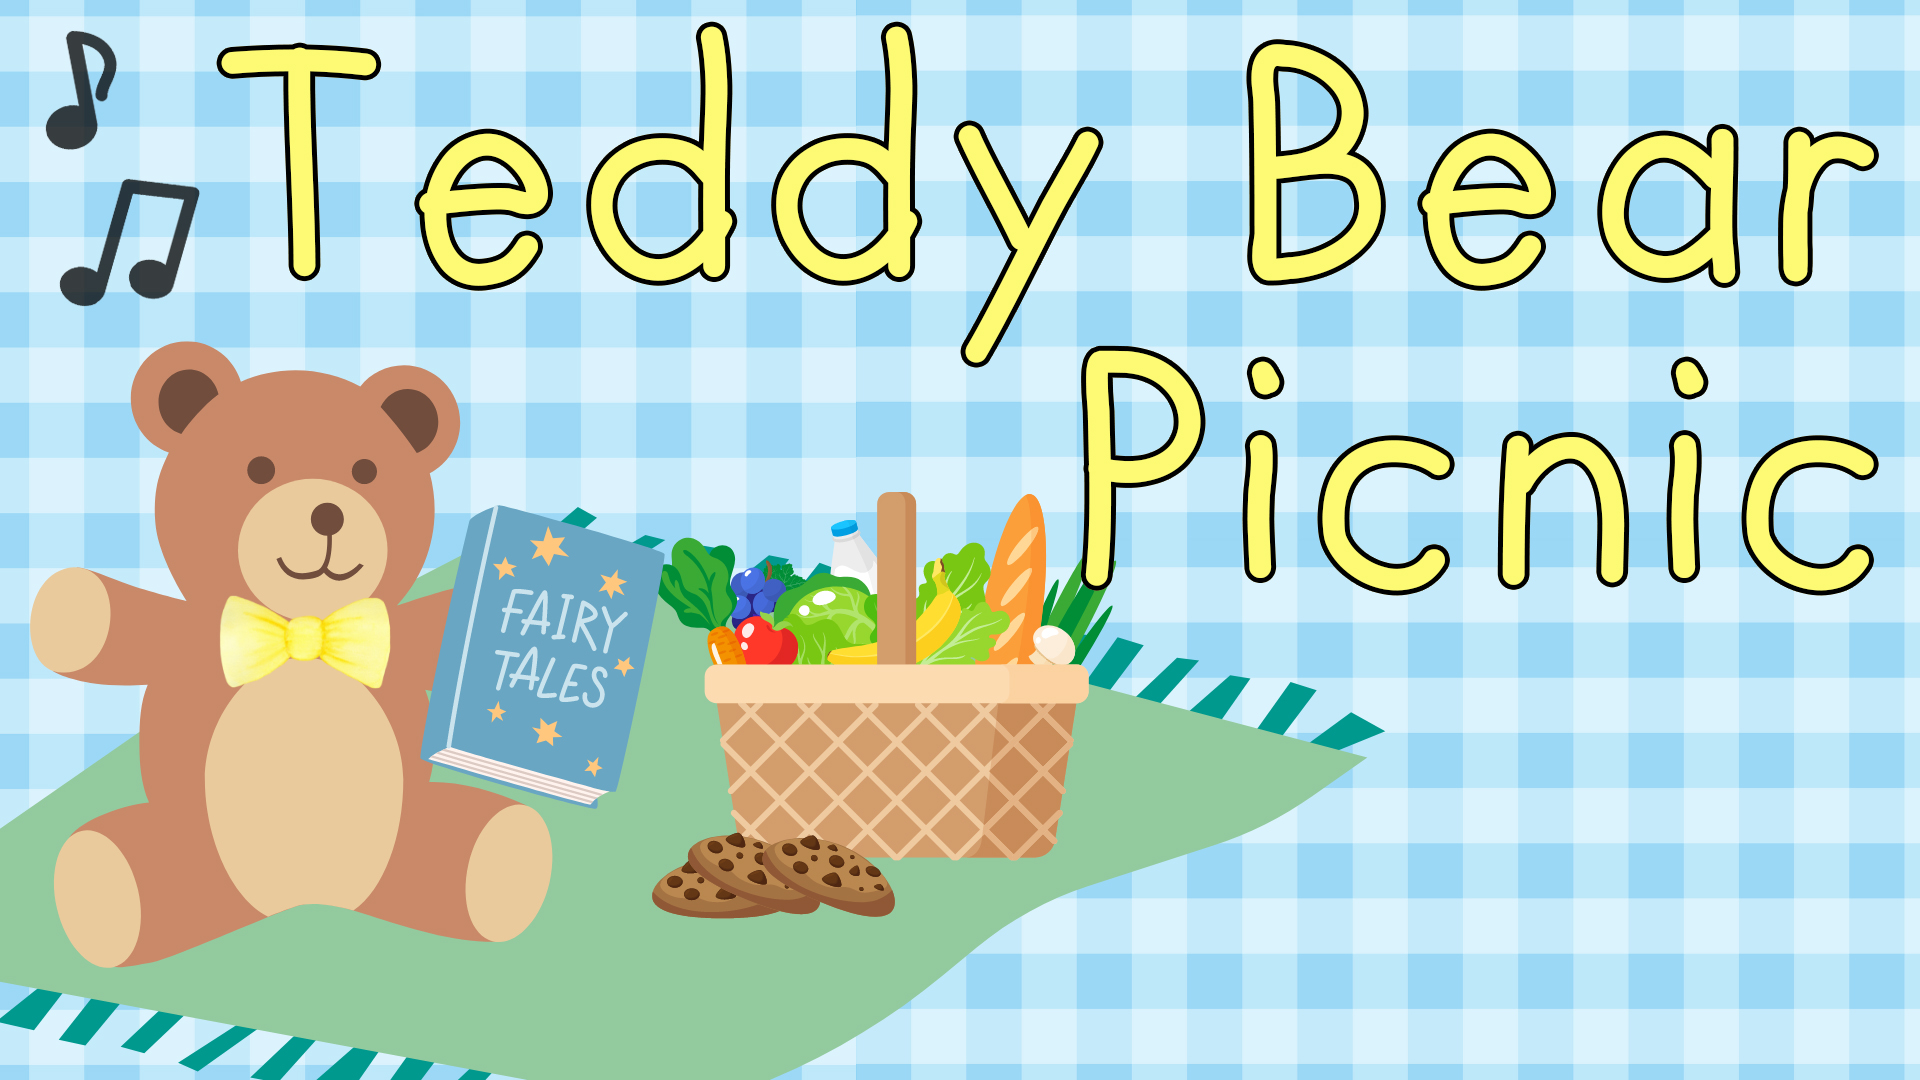 Image reads "Teddy Bear Picnic" against a blue and white gingham background. A teddy bear is sitting on a blanket to the bottom left of the title. The bear is holding a book and a picnic basket is beside the bear. 